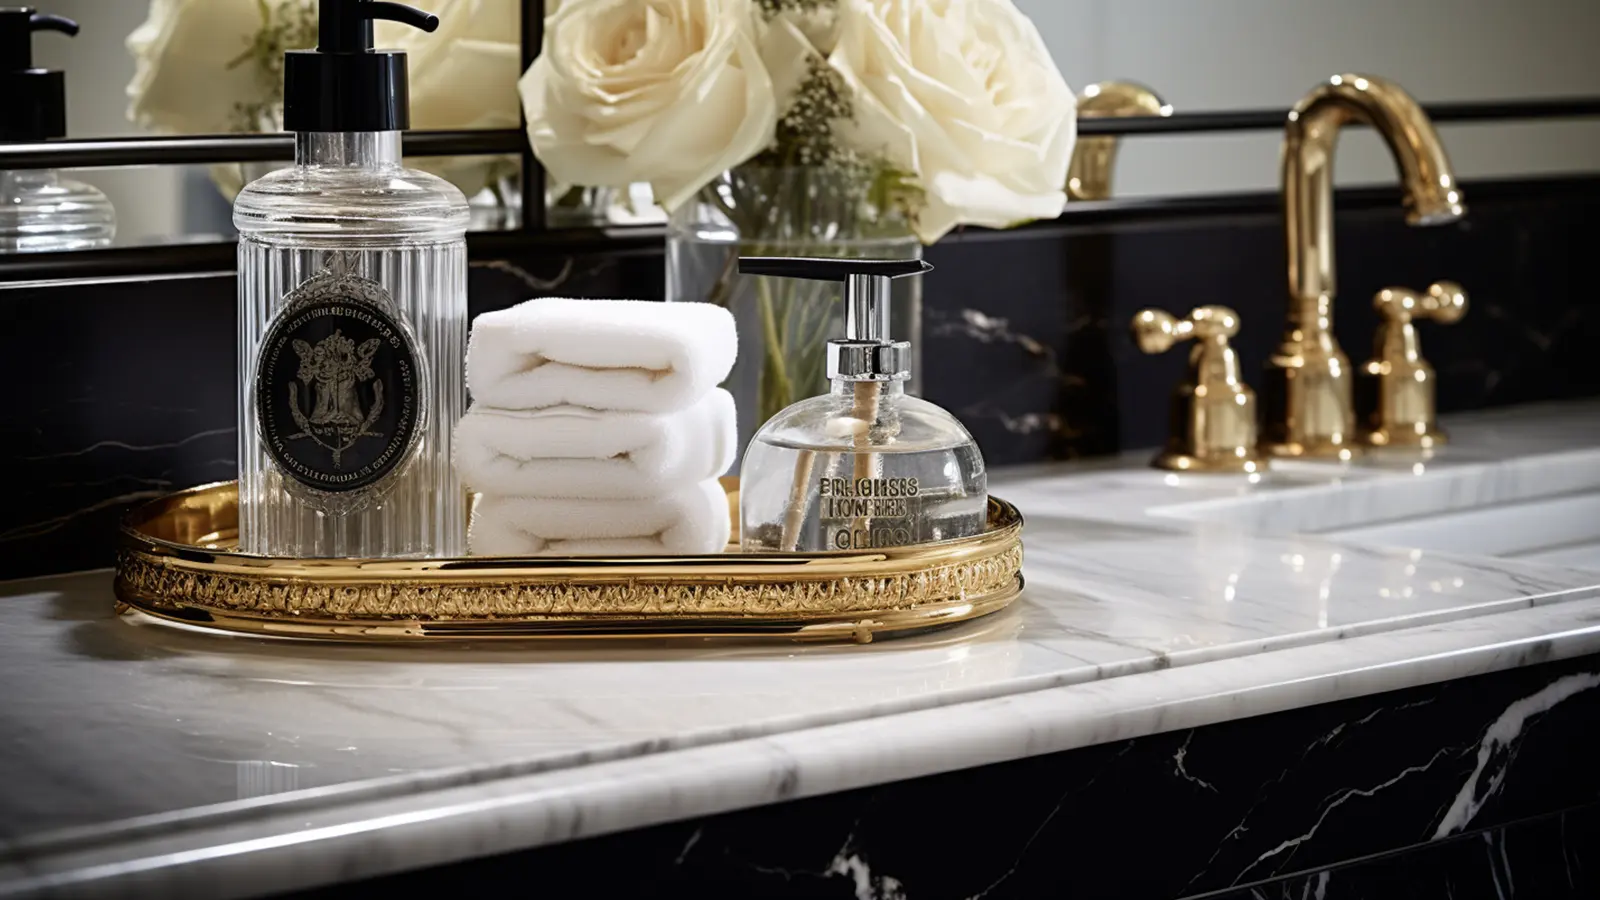 Small bathroom counter decorating ideas: a black and gold bathroom with a gold tray.